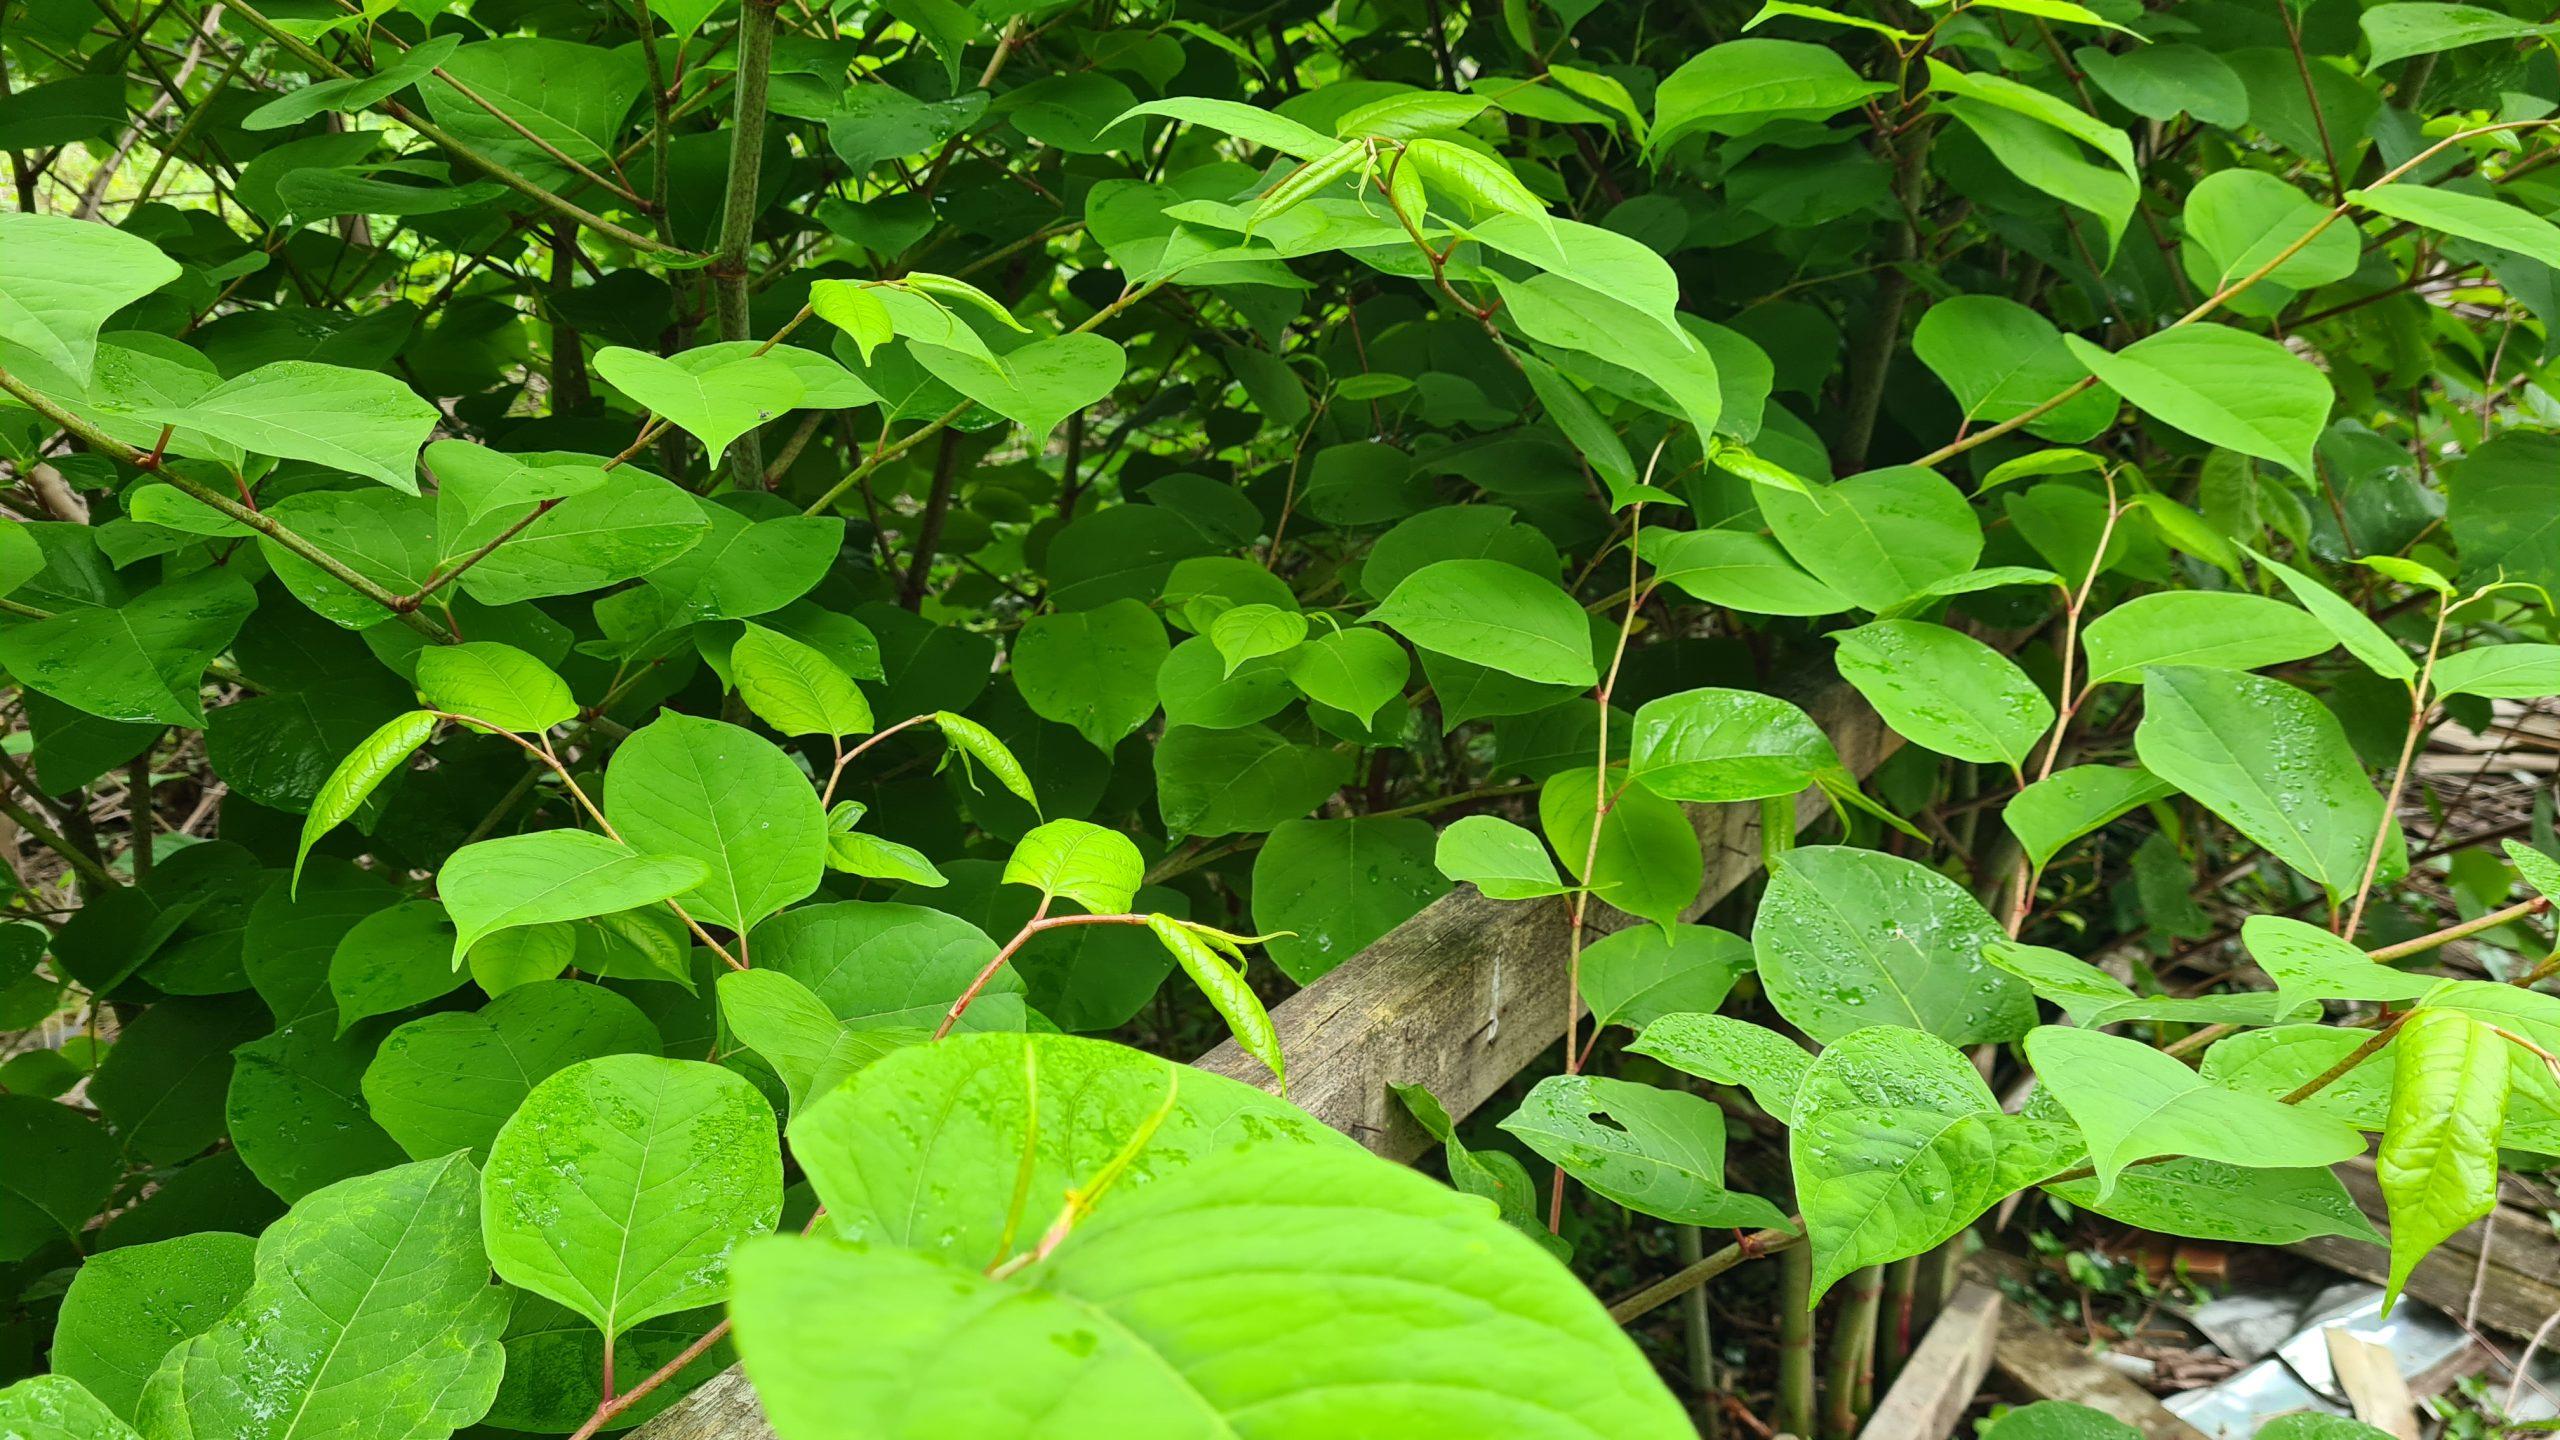 If you find Japanese knotweed on your property you have a duty of care to remove it